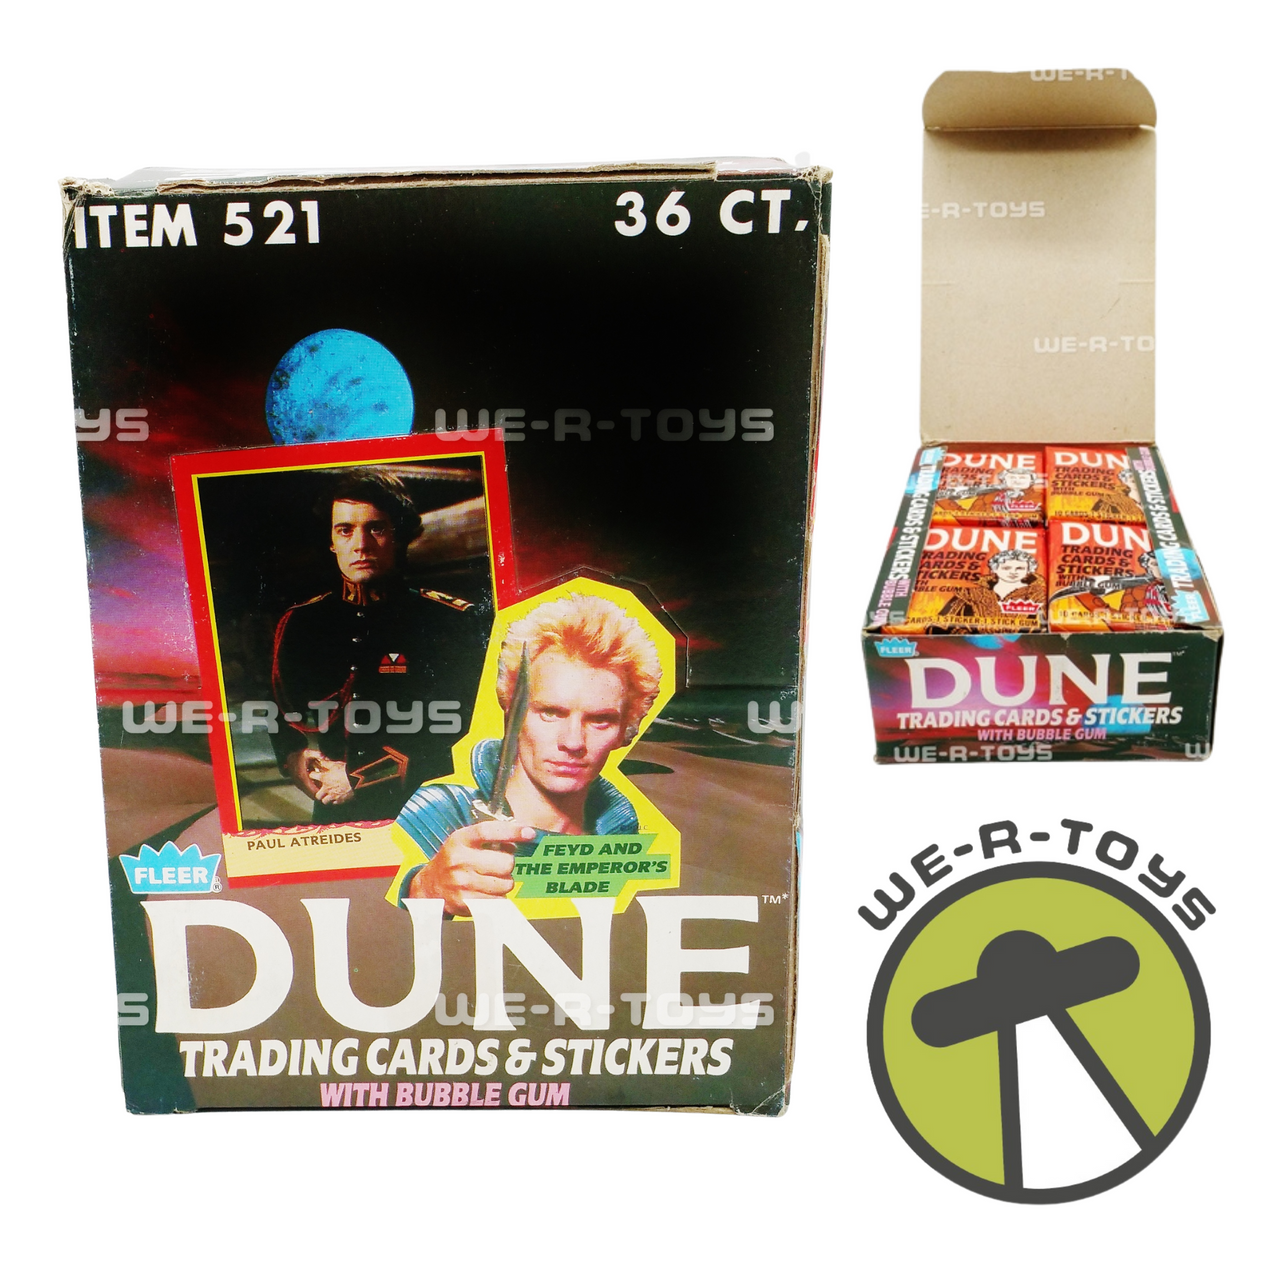 Dune Trading Cards & Stickers With Bubble Gum Box of 36 Fleer 1984